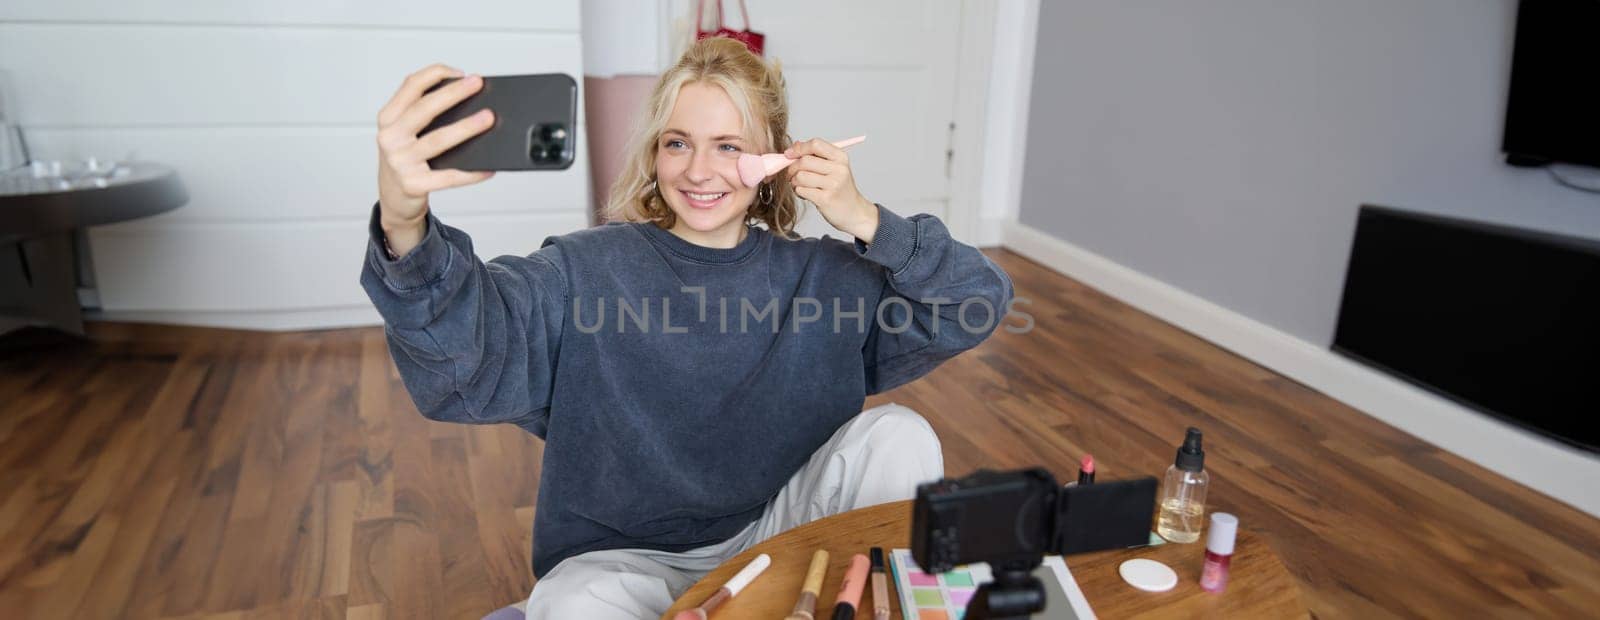 Image of stylish young woman, social media influencer, taking pictures on mobile phone, doing makeup tutorial for followers online, recording video vlog in her bedroom, showing brush.